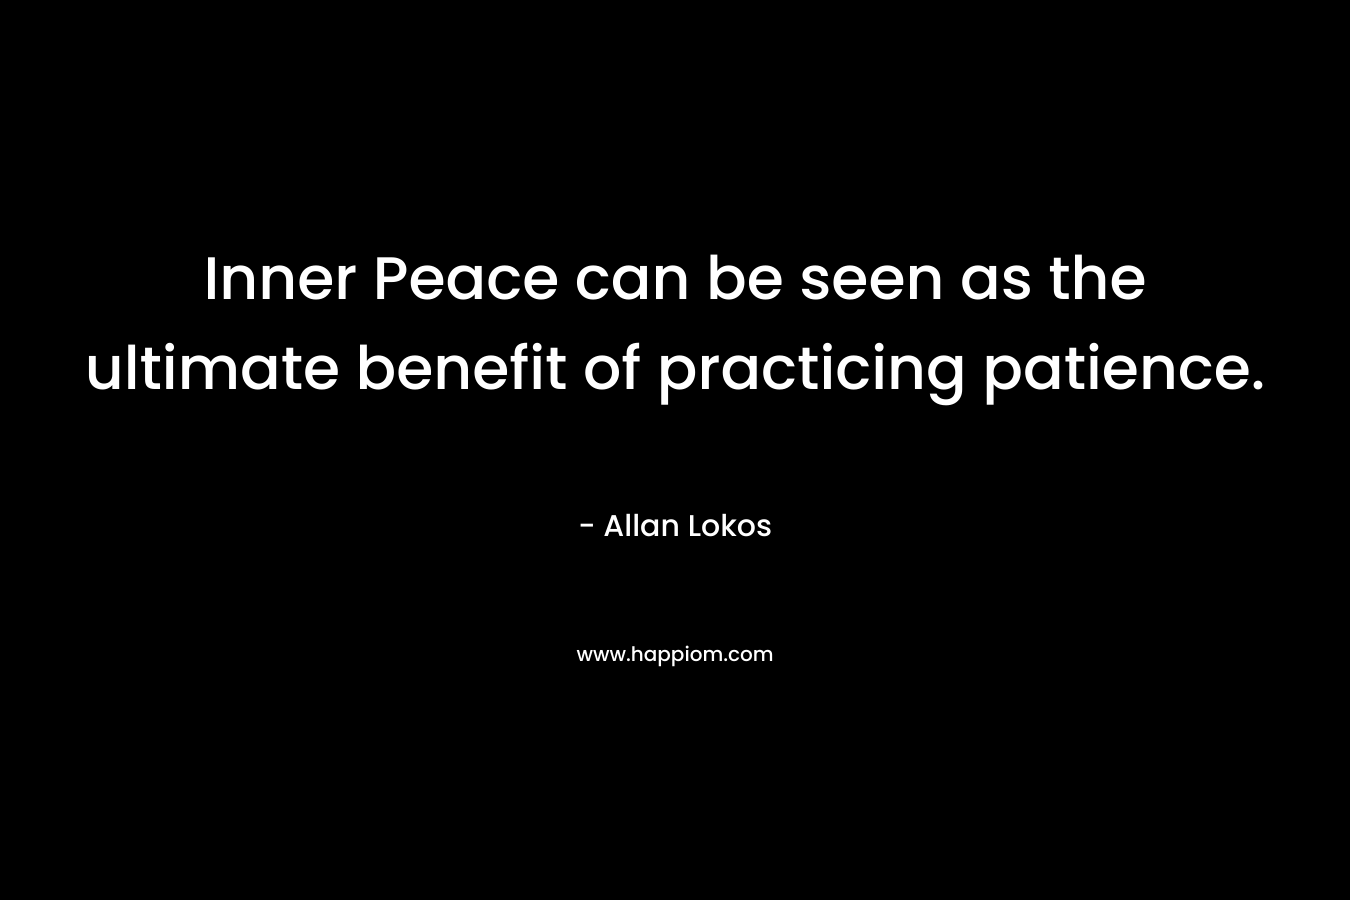 Inner Peace can be seen as the ultimate benefit of practicing patience.